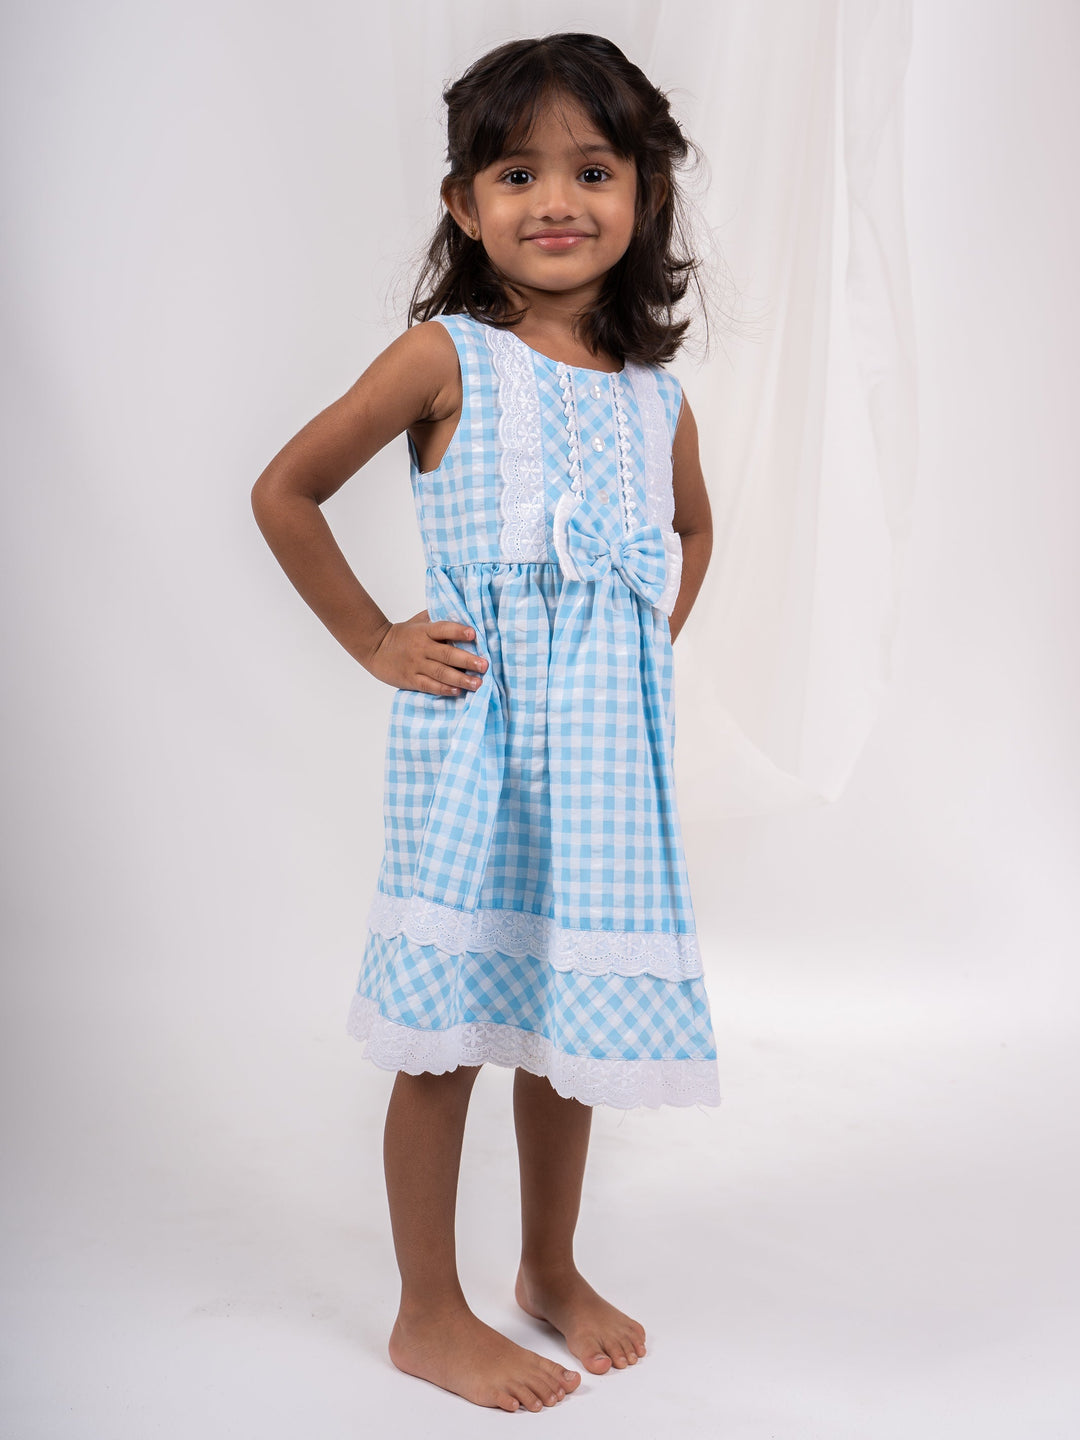 The Nesavu Frocks & Dresses Blue Checked Soft Cotton Frock For Baby Girls With Lace Trims And Bow psr silks Nesavu 12 (3M) / Blue GFC707